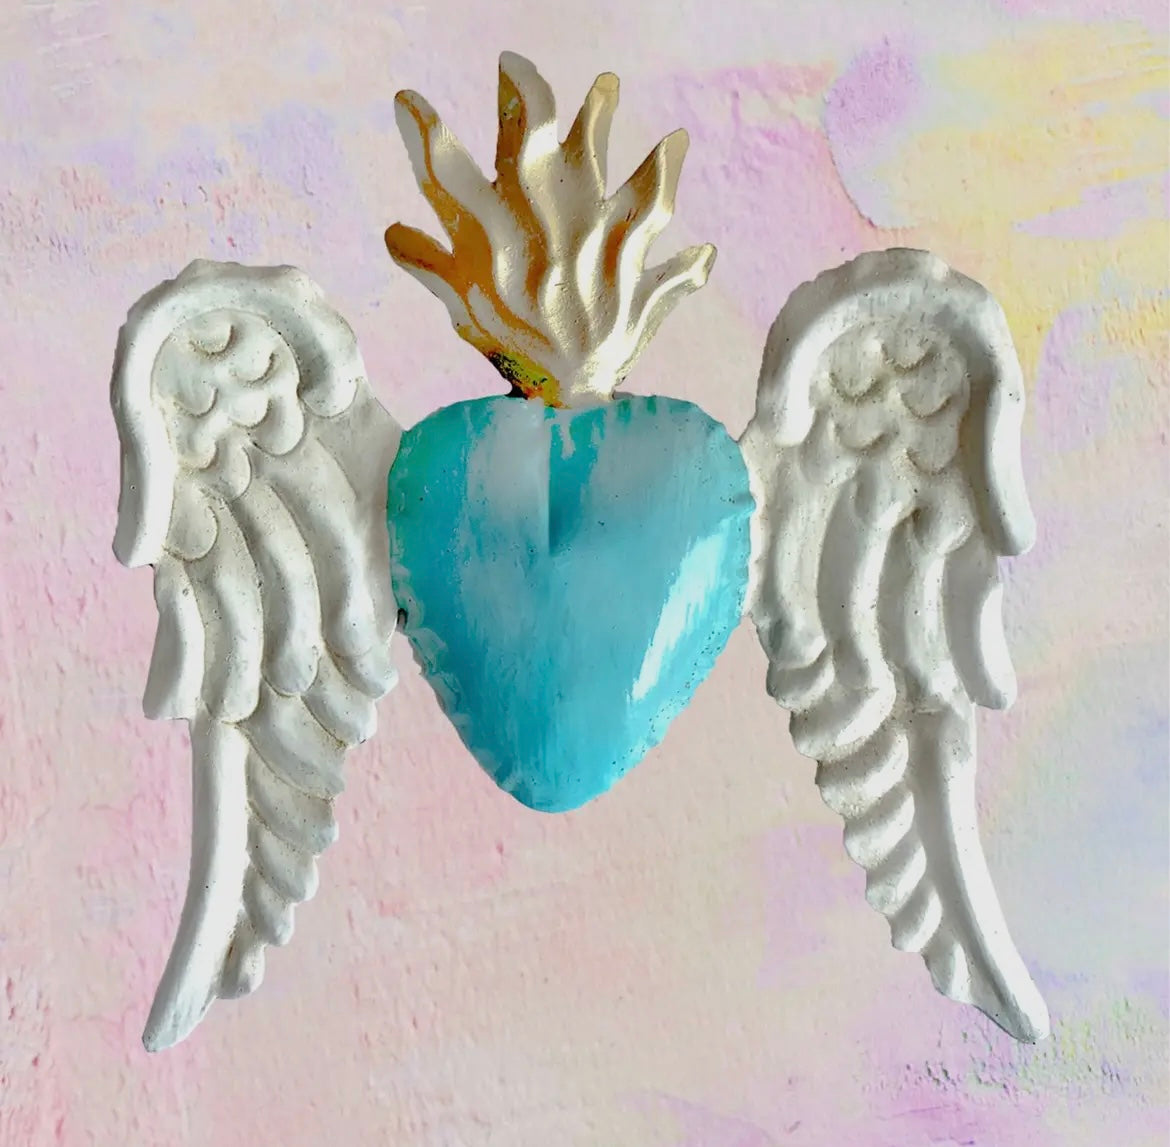 Ex-voto Mexican heart with inlaid wings